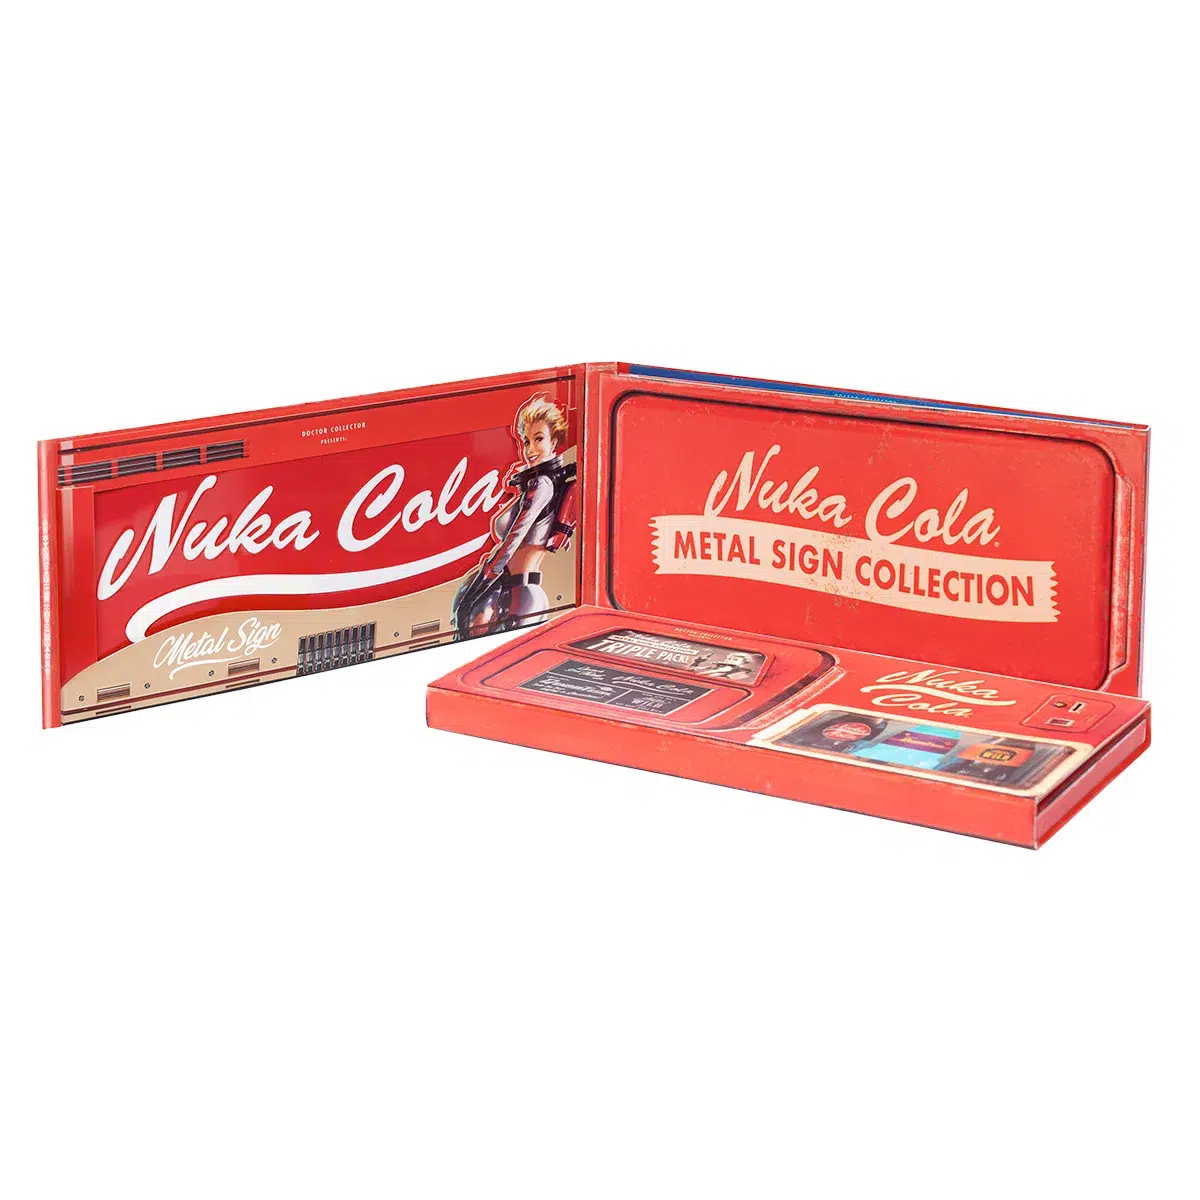 Fallout Metal Sign Collection Triple Pack "Nuka Cola"